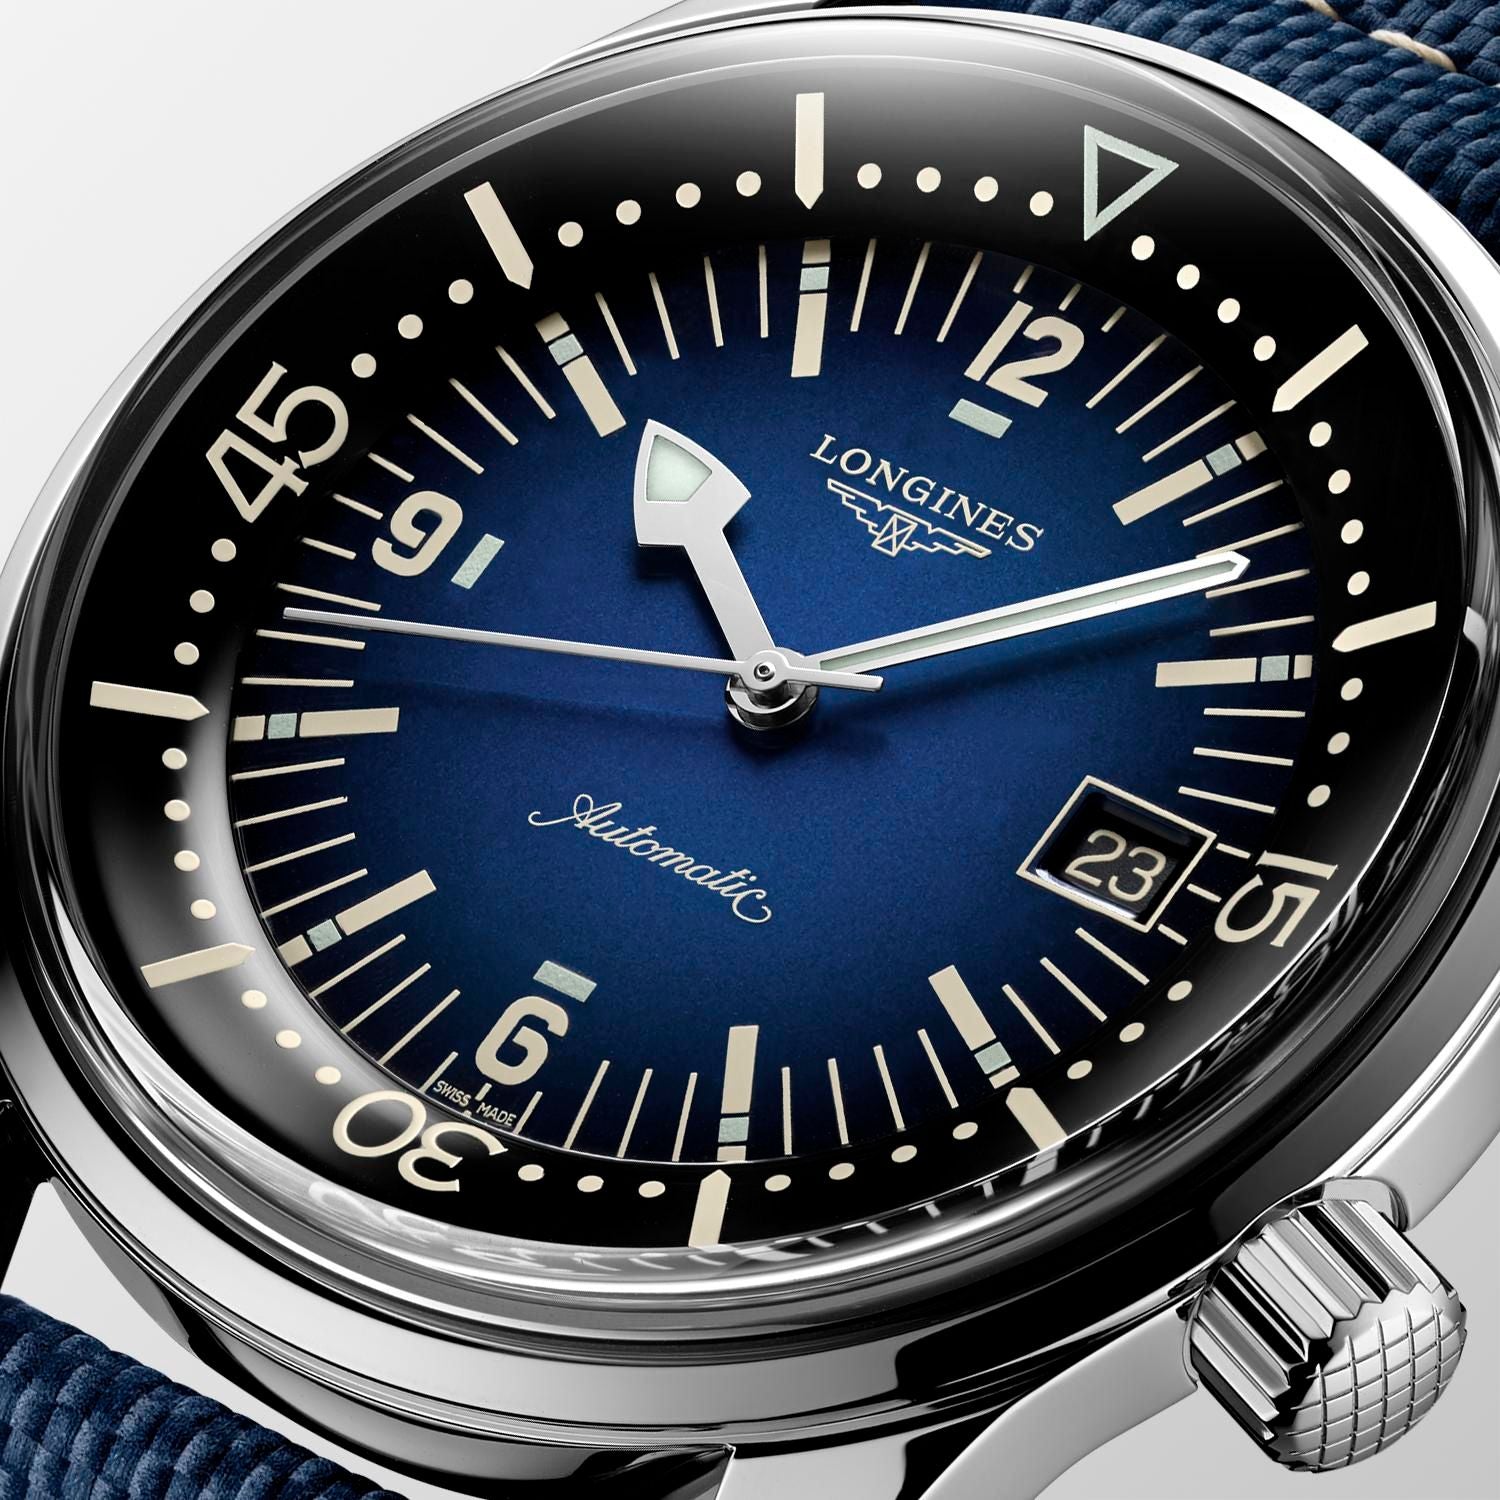 Orologio The Longines Legend Driver Watch